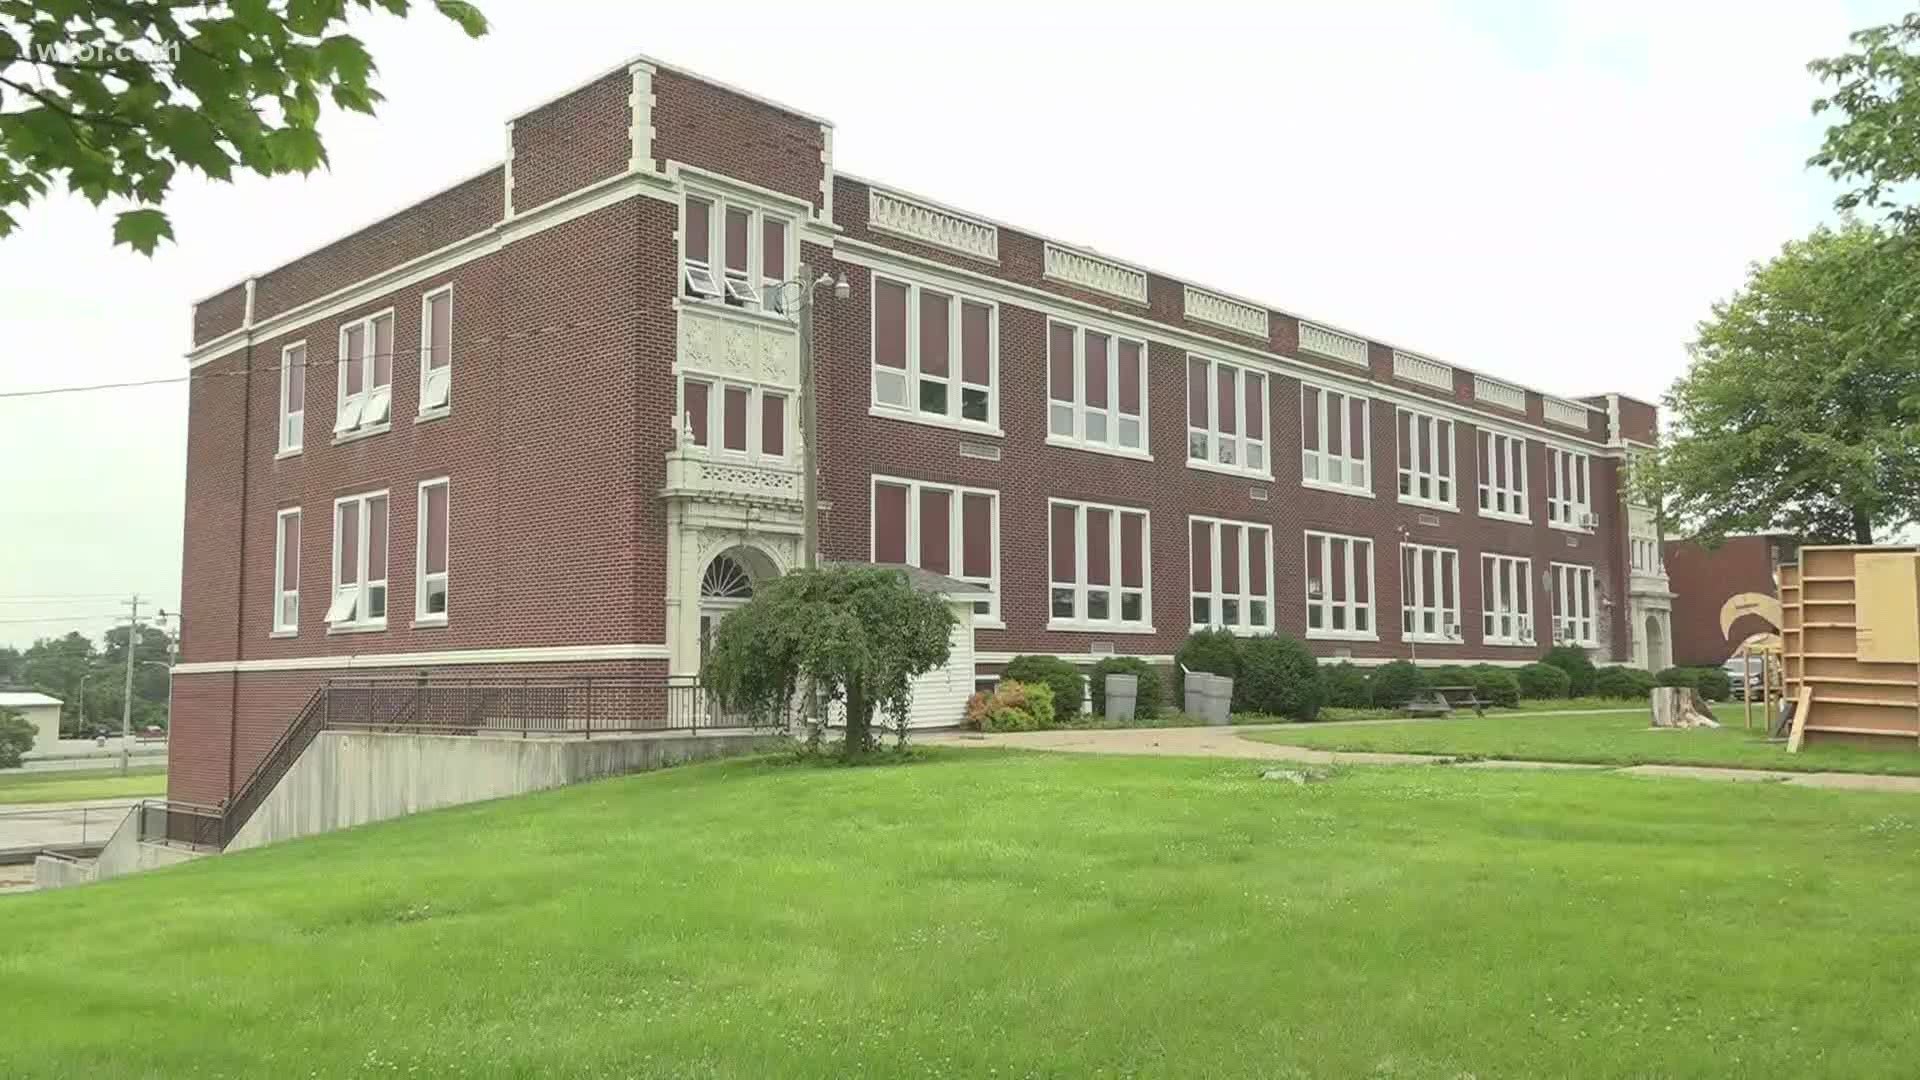 The facility was vacated by the Napoleon Local School district in 2015.  Now, a non-profit is aiming to renovate space inside the building into a community center.